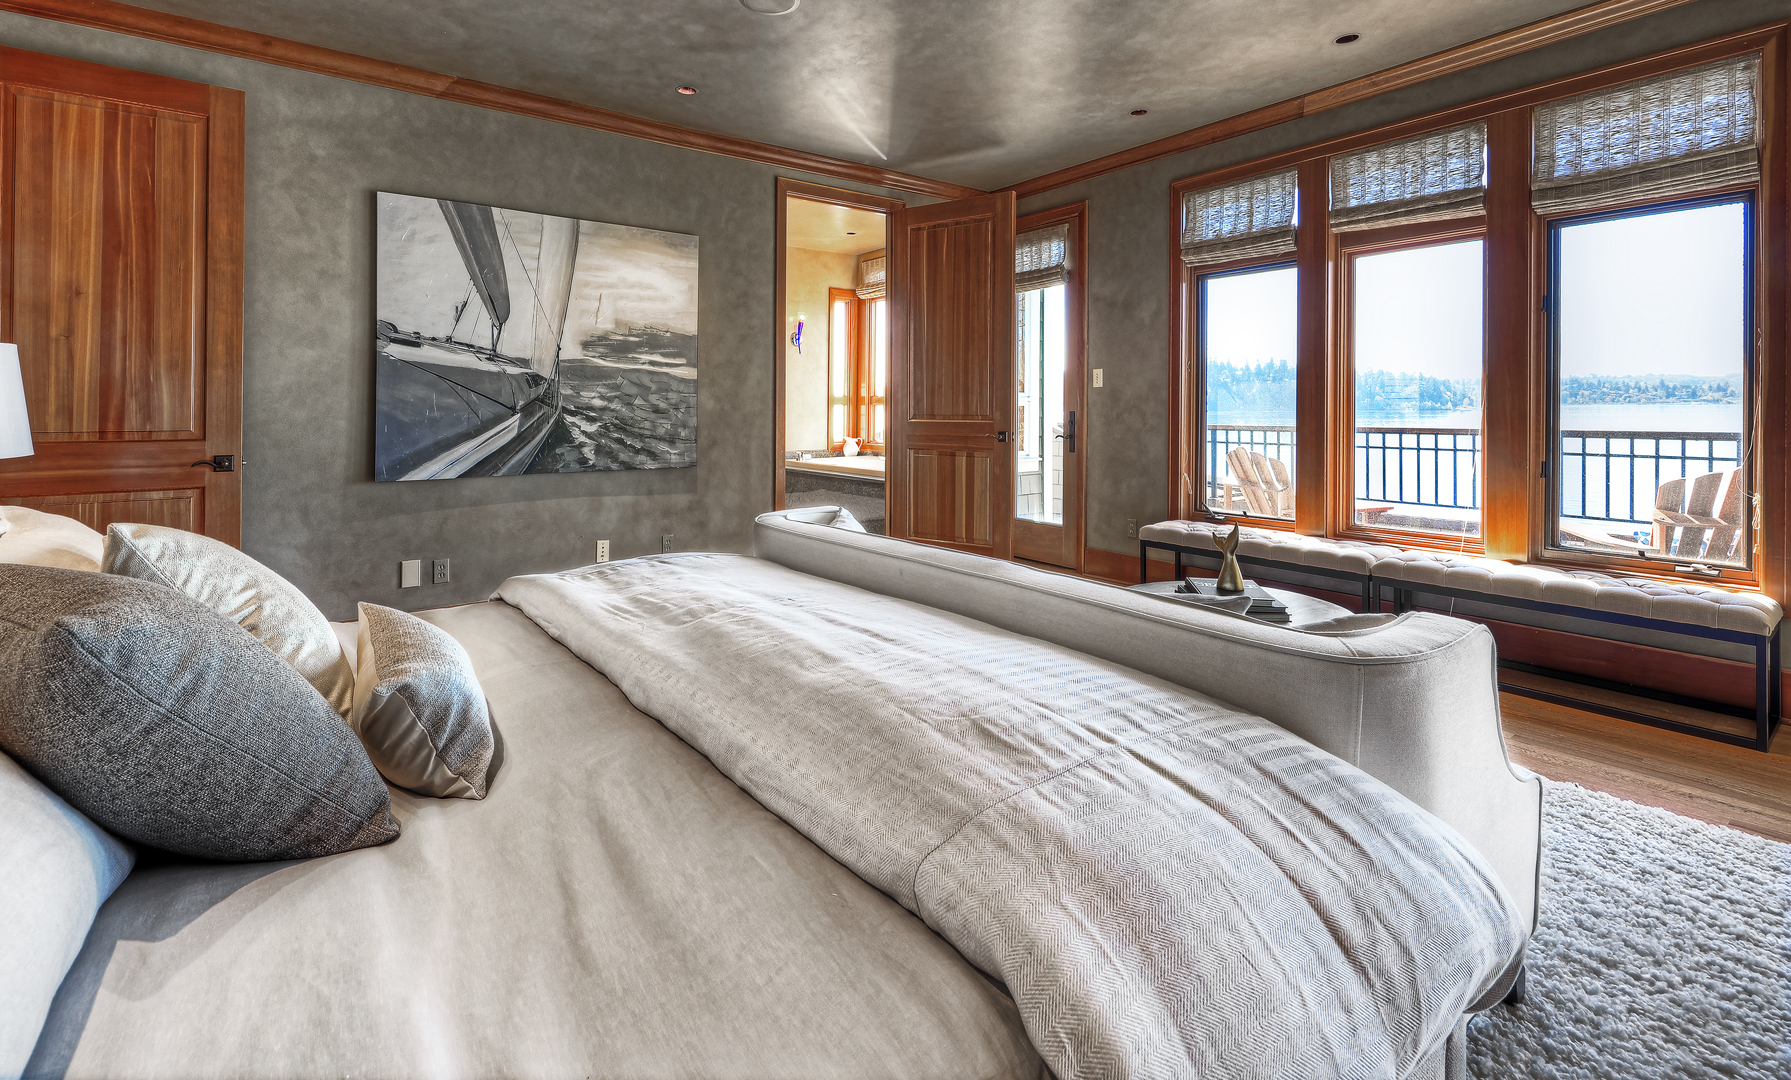 Photo of Master Bedroom in PNW home designed by a Seattle Residential Architect